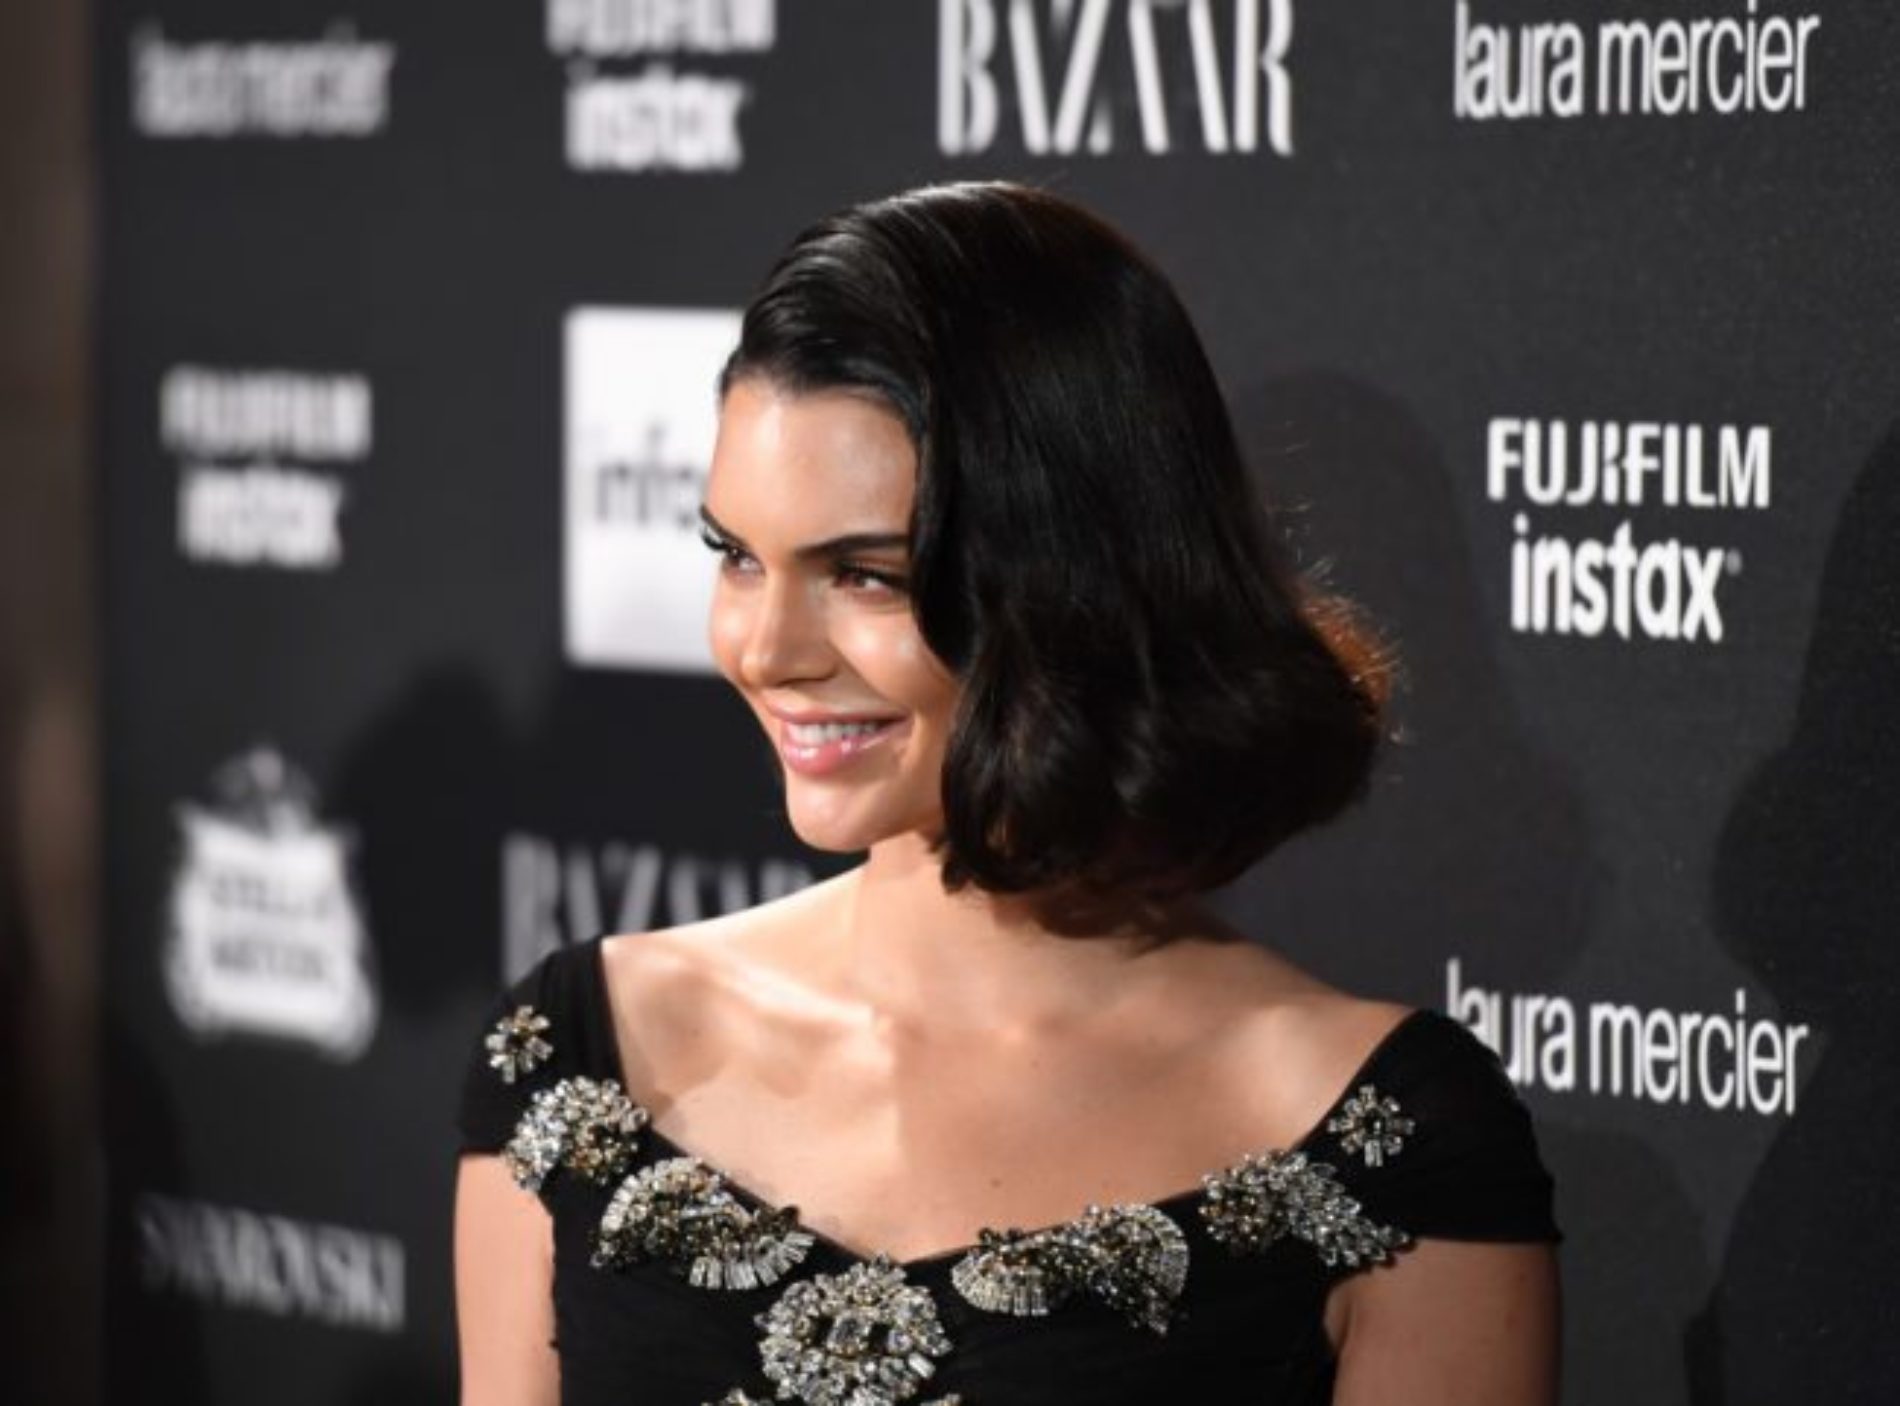 “I’m Not Gay.” Kendall Jenner addresses the rumours about her sexuality